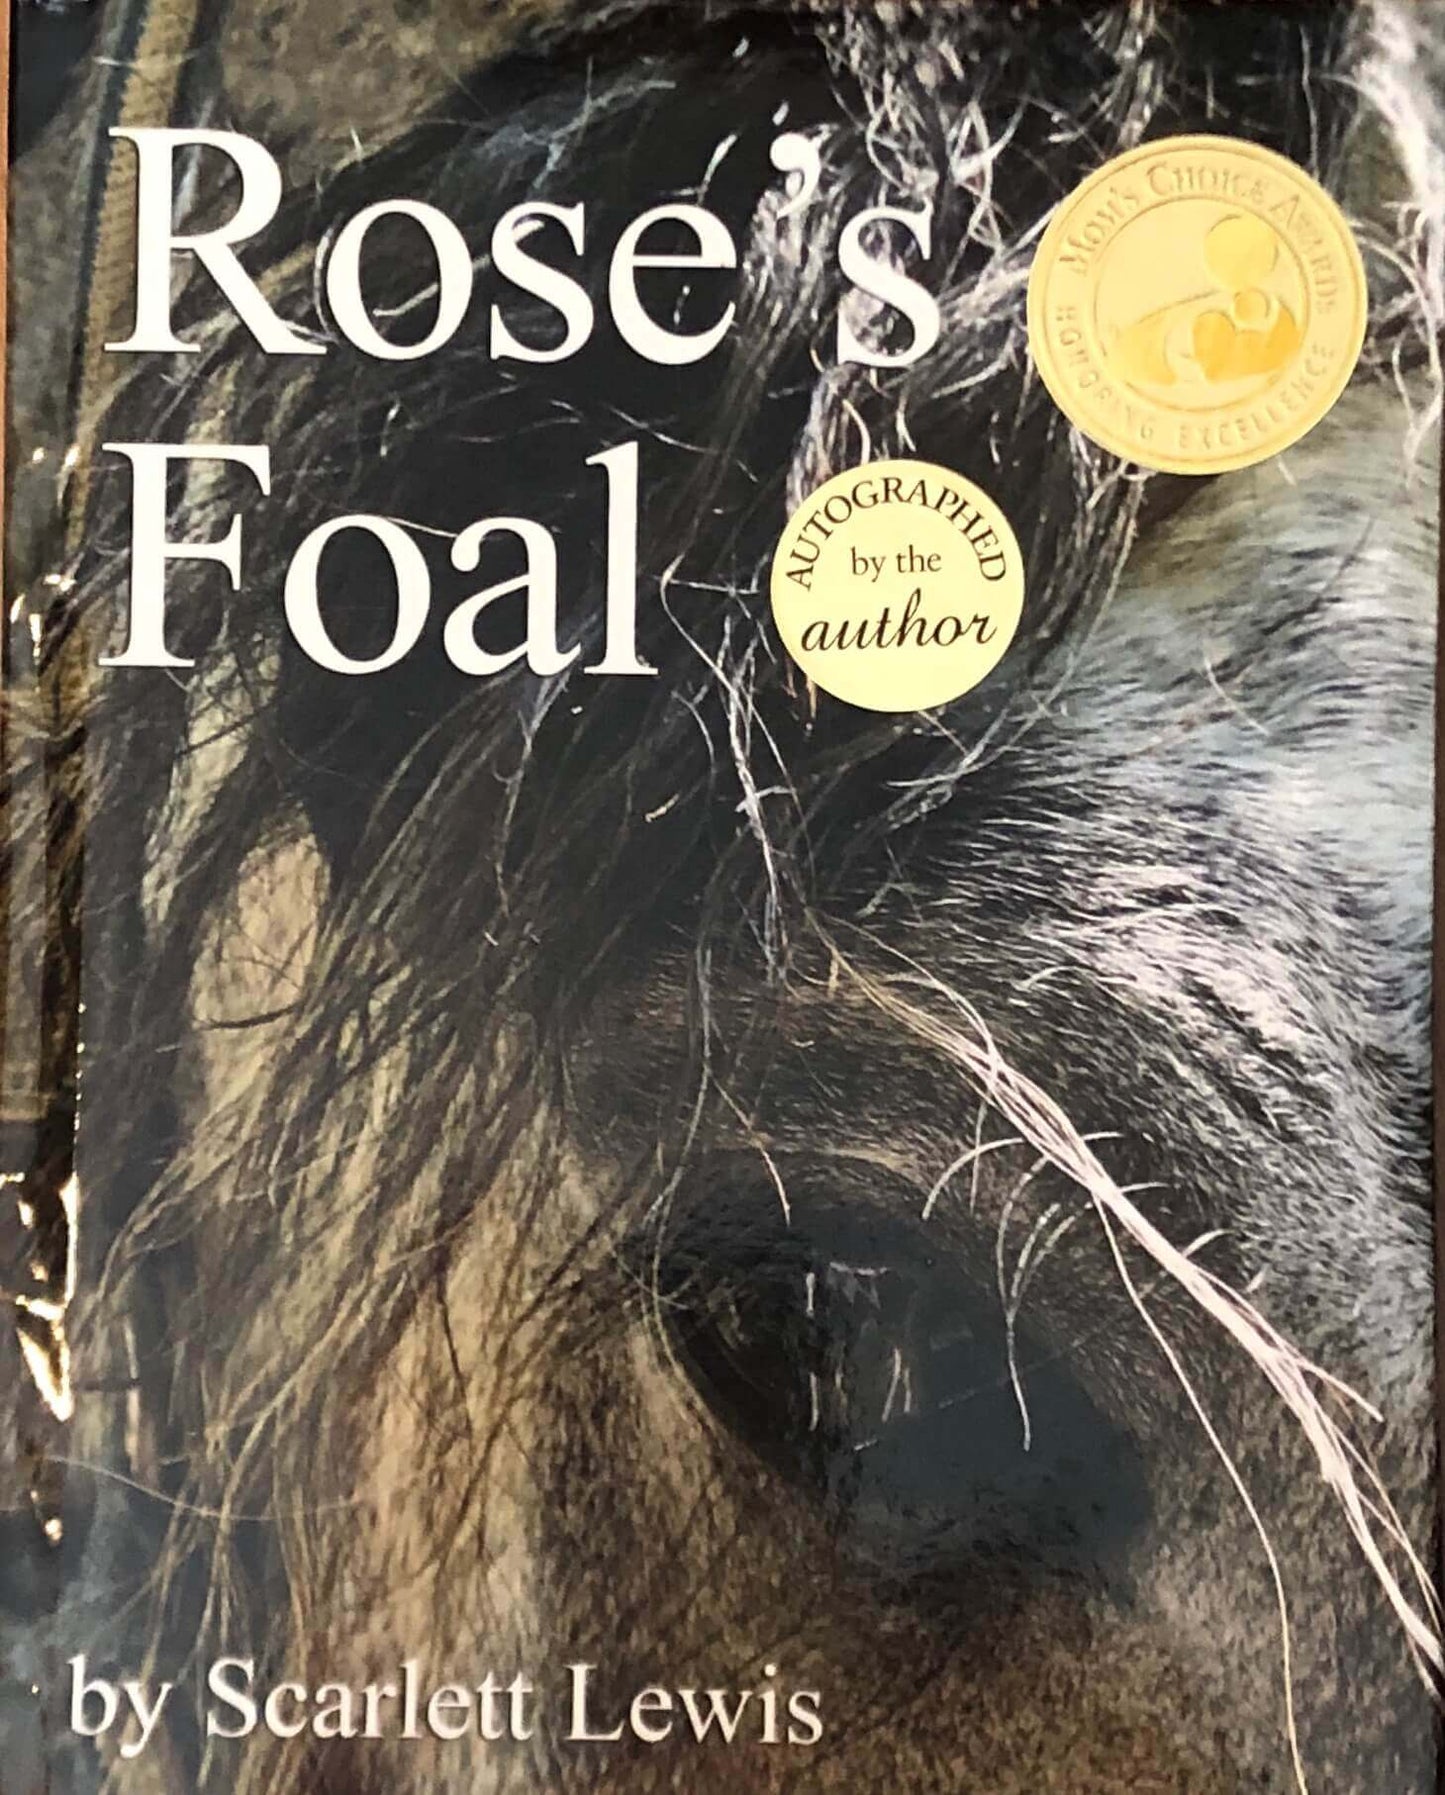 Rose's Foal (Paperback) - SIGNED